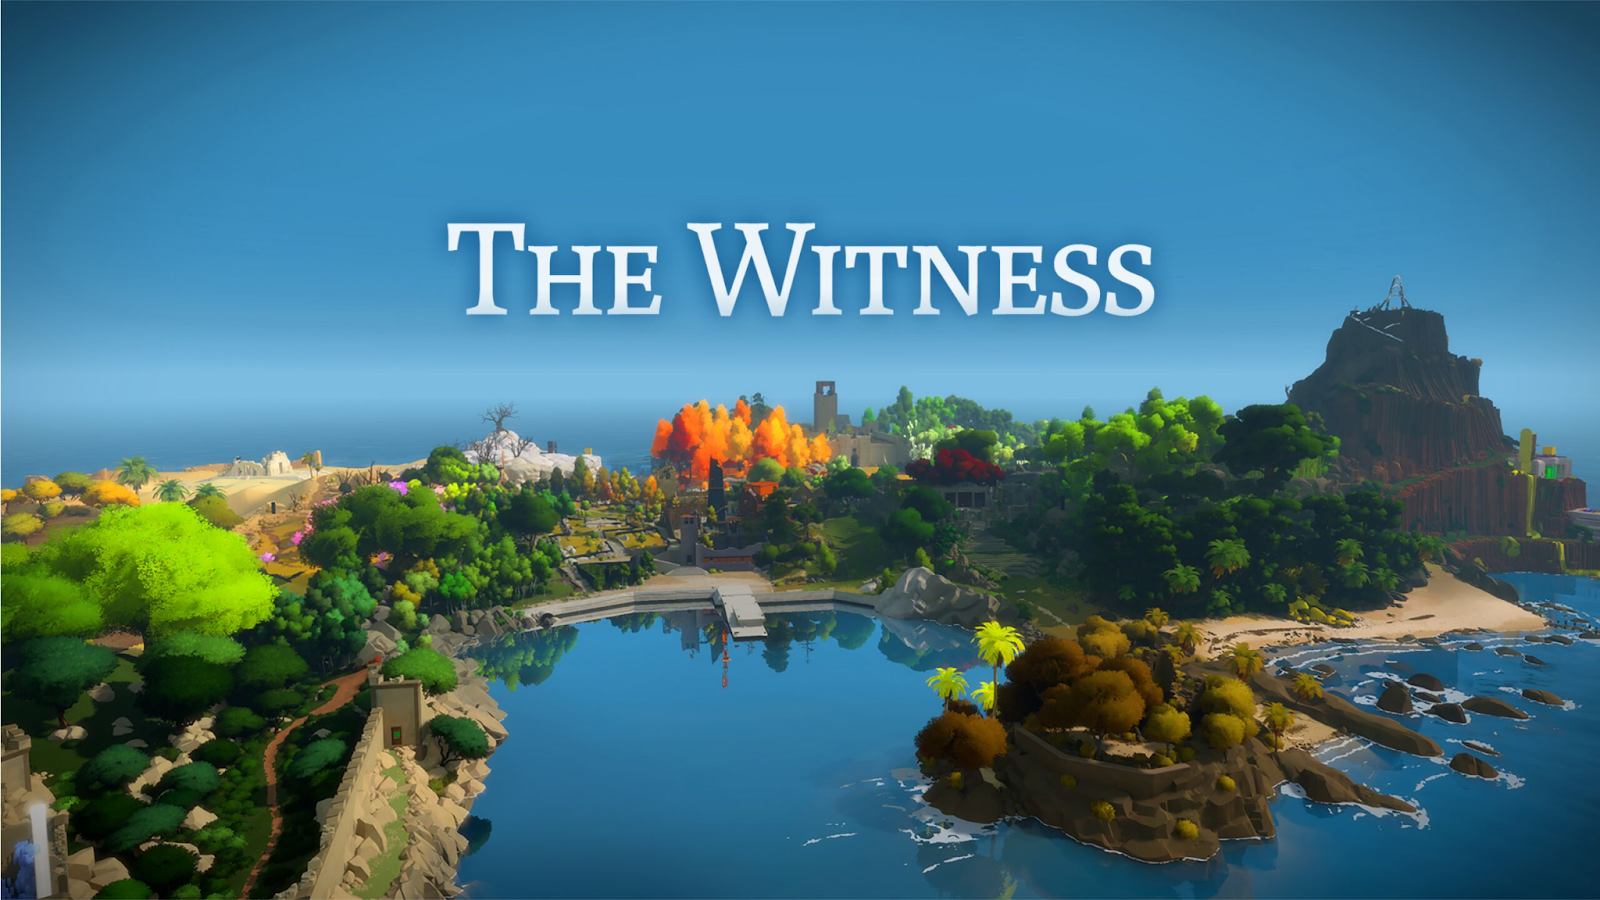 4. The Witness